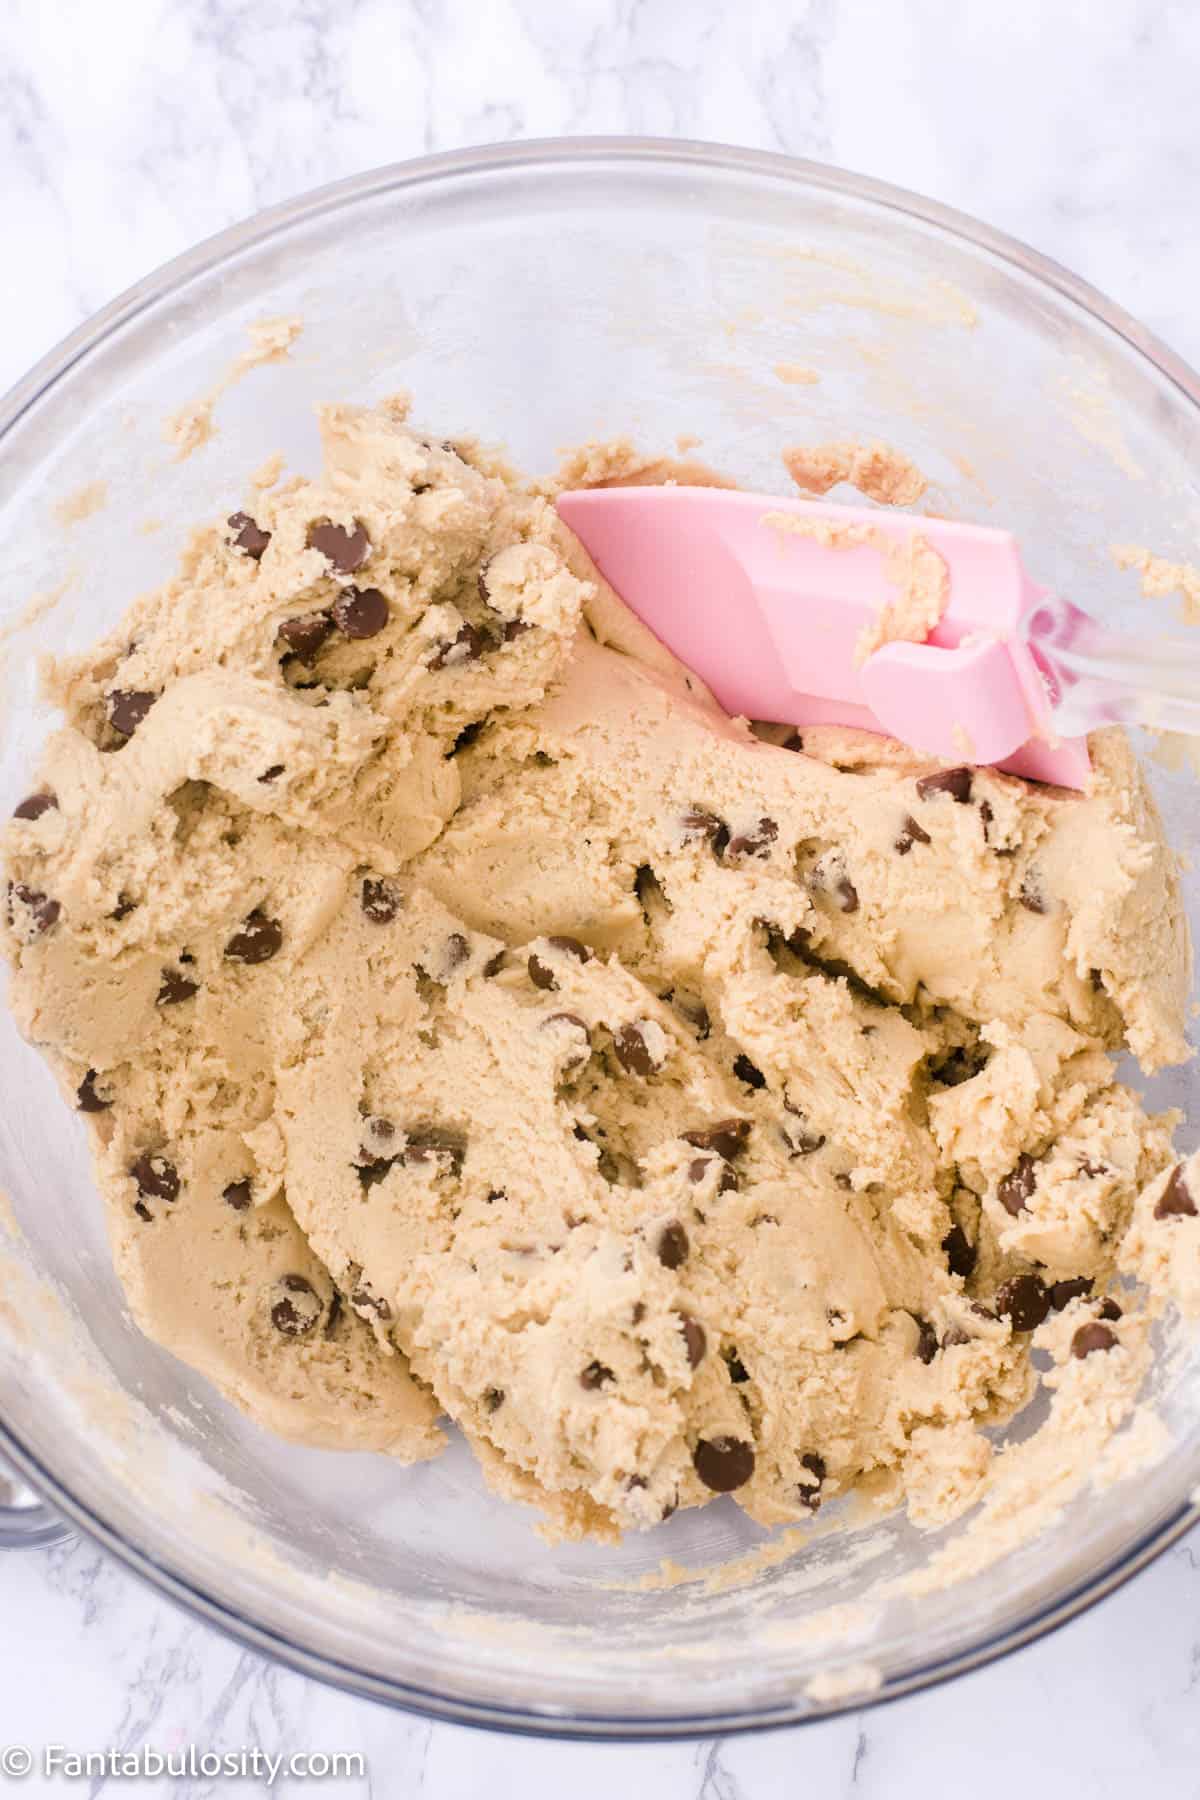 Chocolate chips stirred in to dough